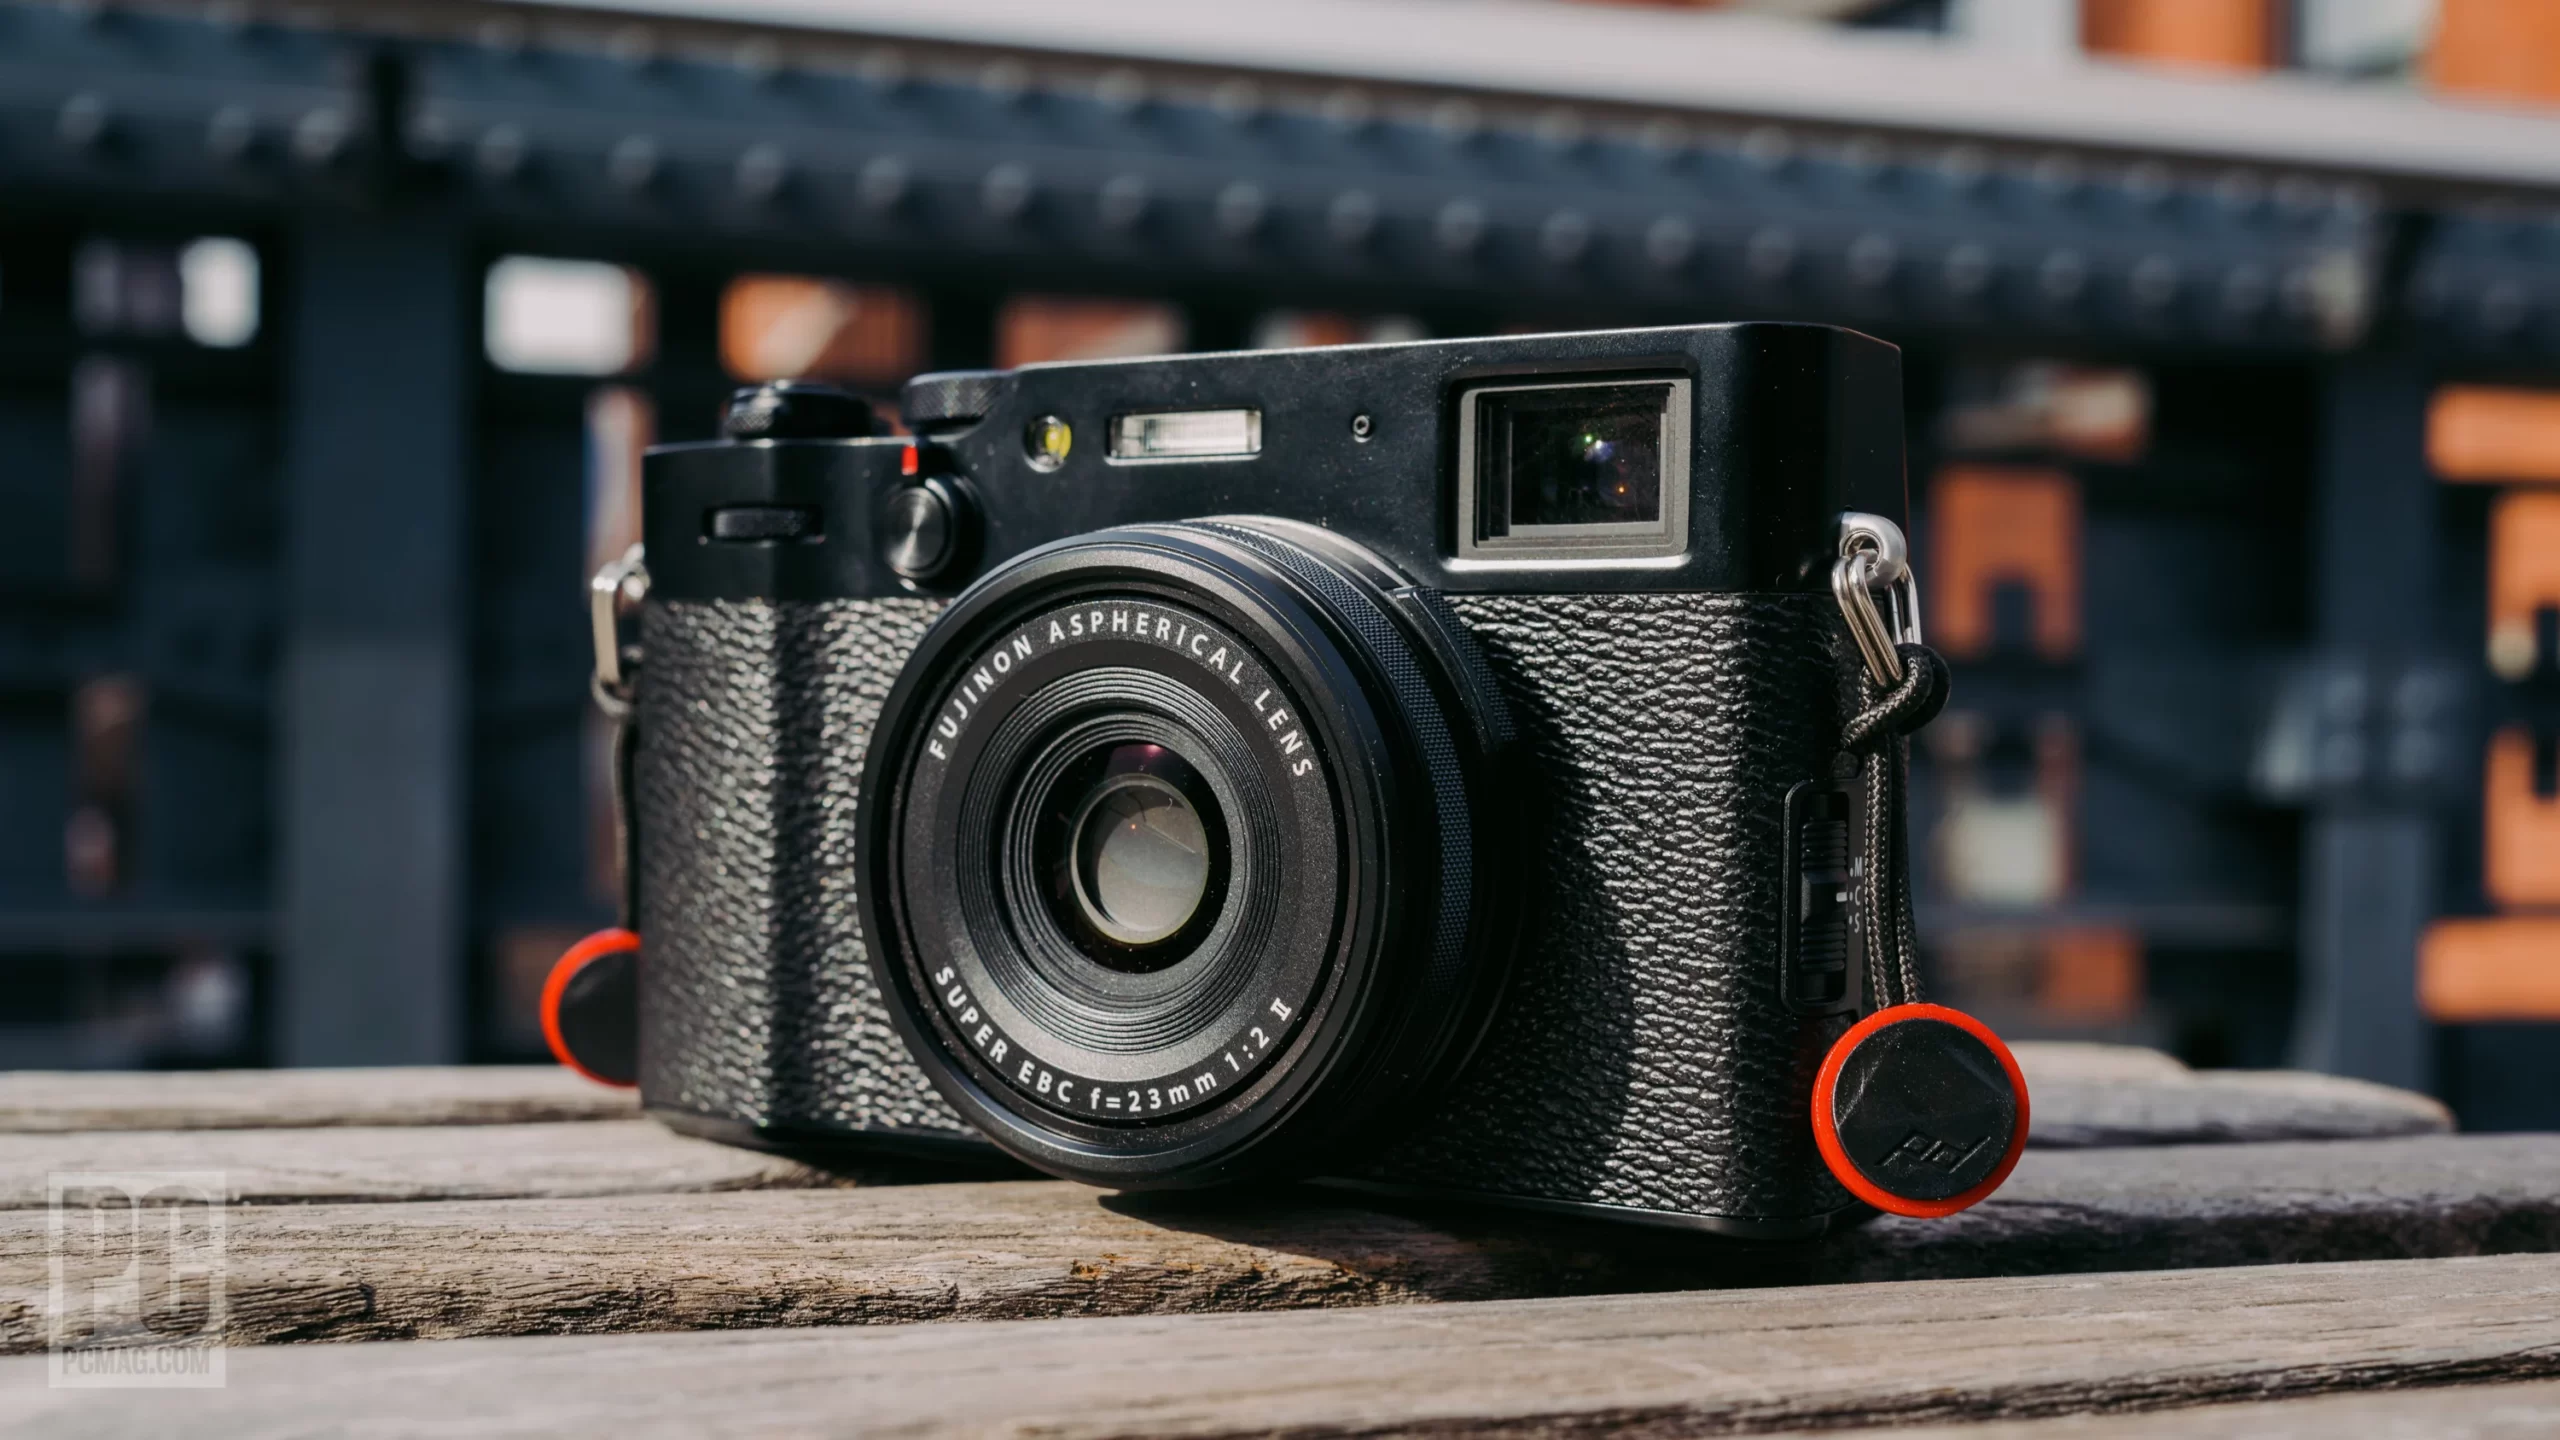 The 6 Best Point-And-Shoot Cameras - 19 Tested Of 2022 [Buyer’s Guide]